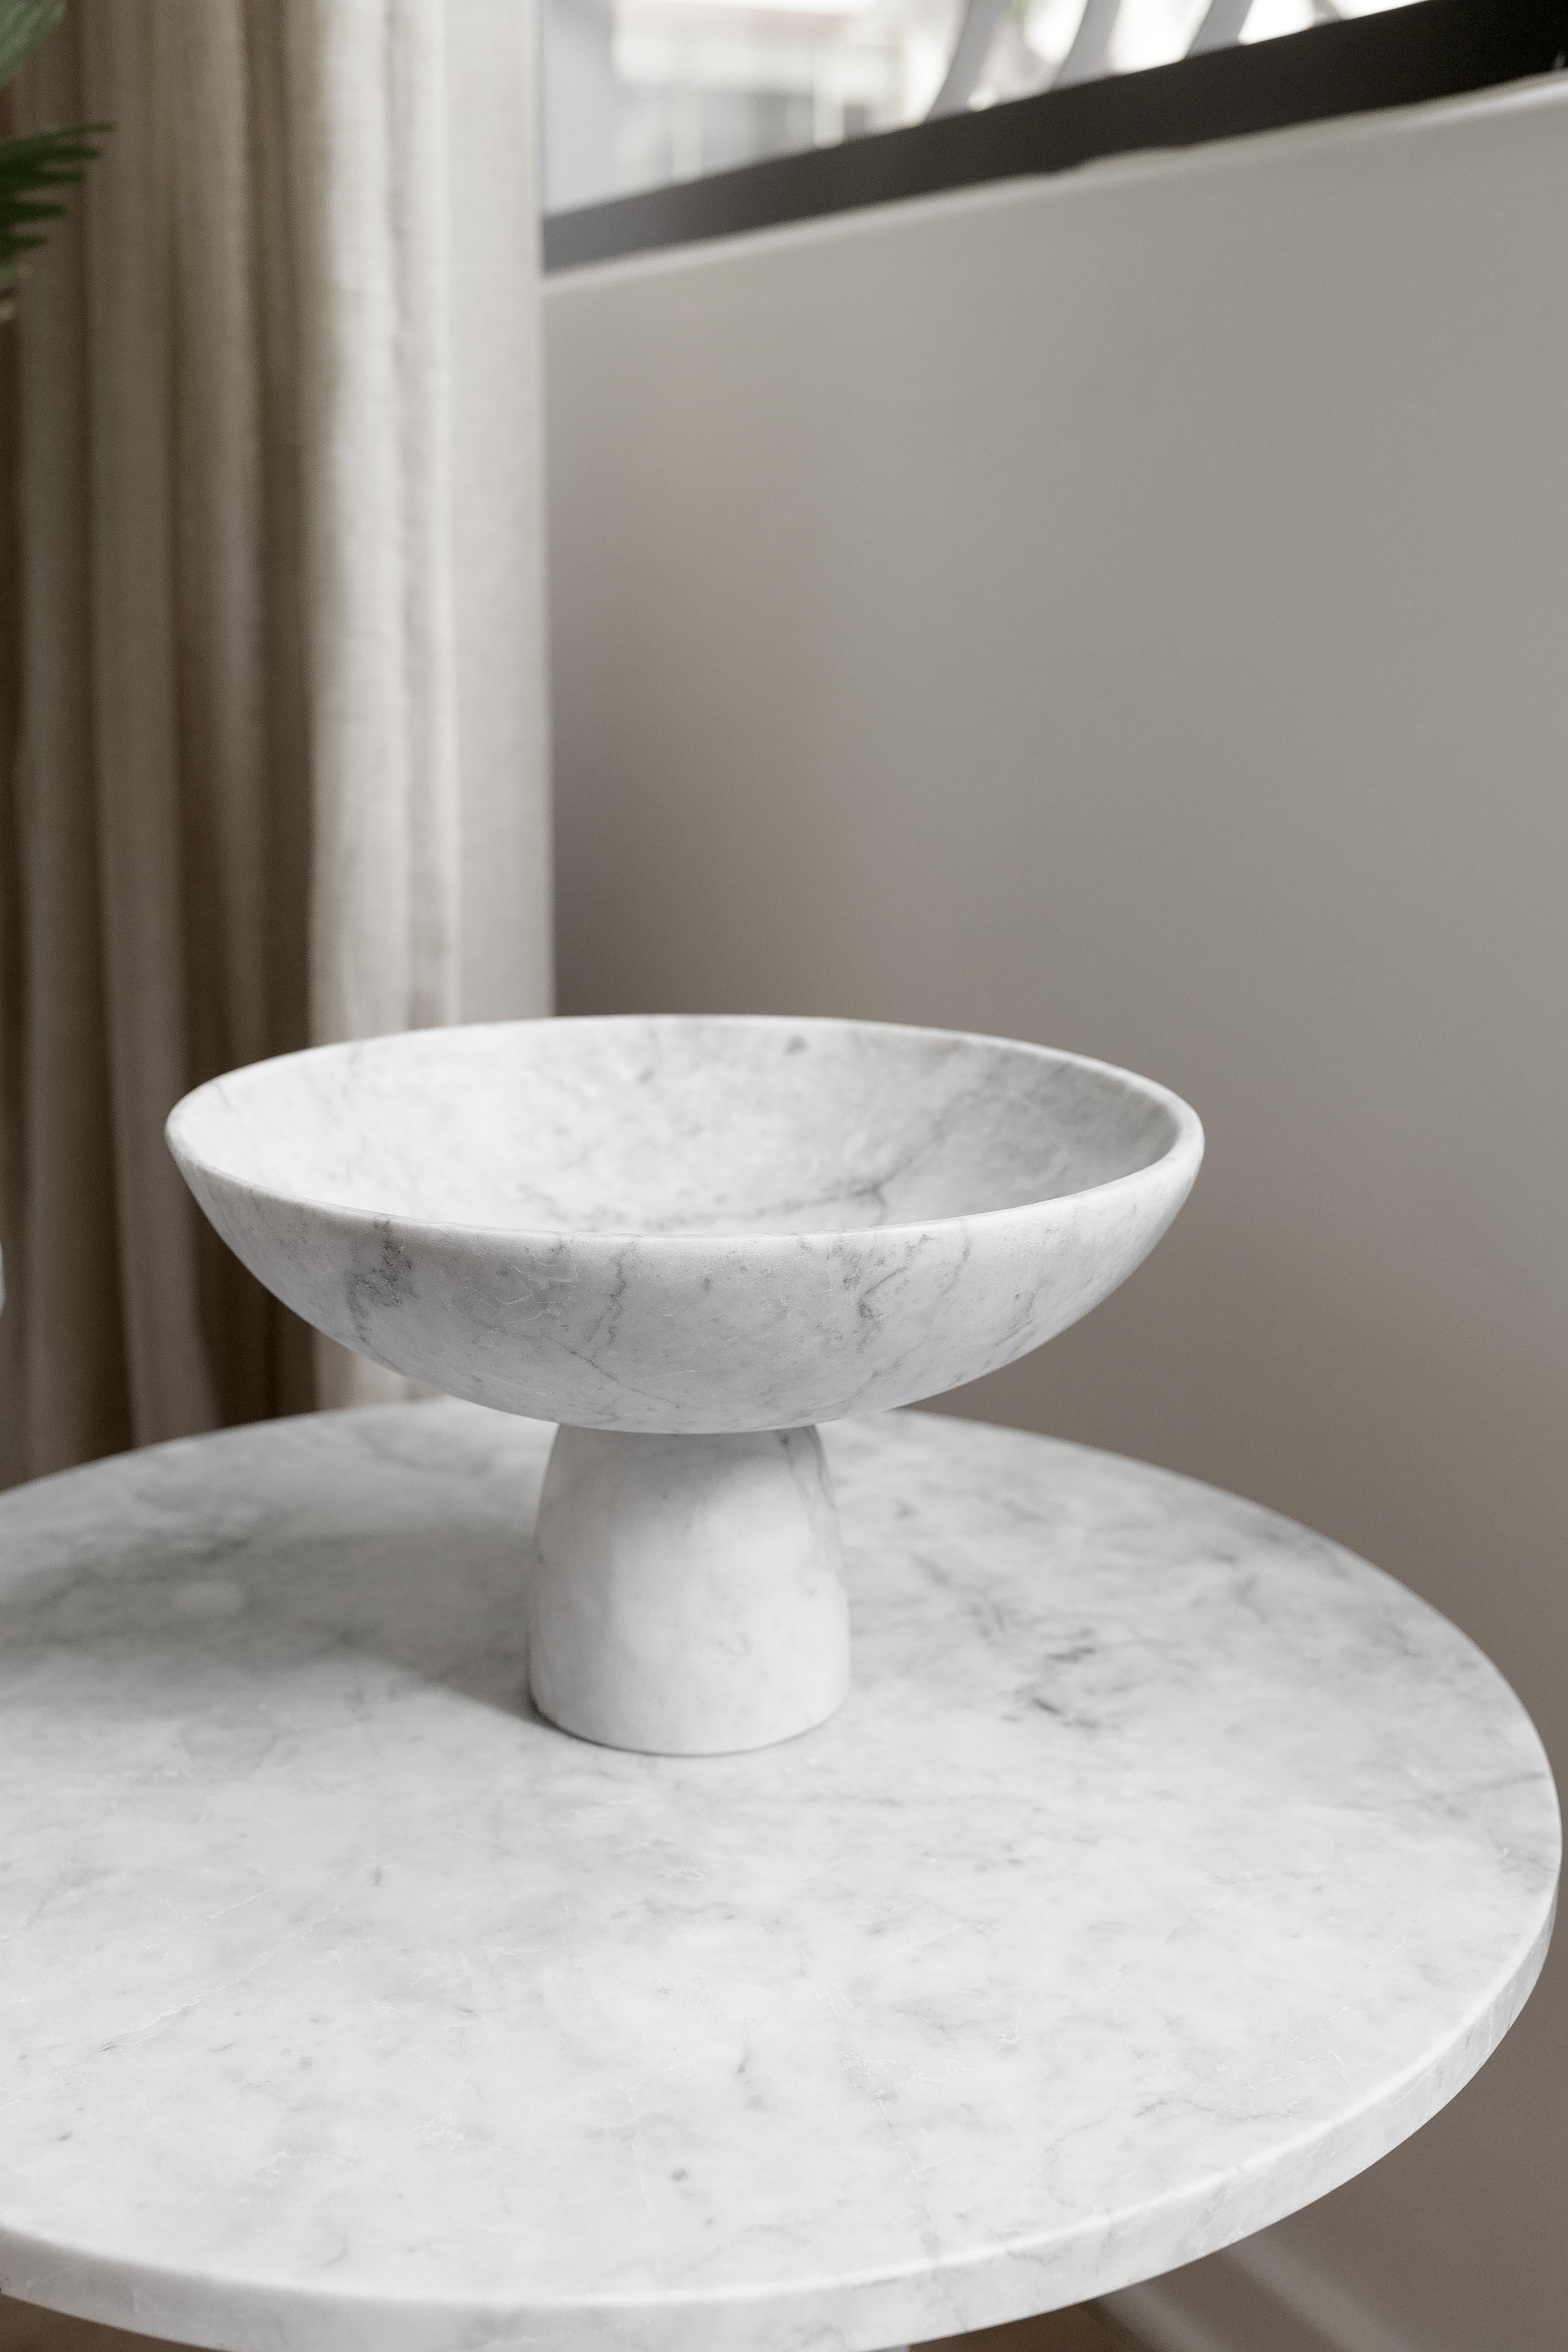 Bowl in carved Veneciano white marble. Handmade in MÃ©xico by local craftsmen.  Production time: 6-8 weeks for items without marble / 13-14 weeks for marble pieces. Shipping +10 additional business days. Casa Quieta uses natural materials such as